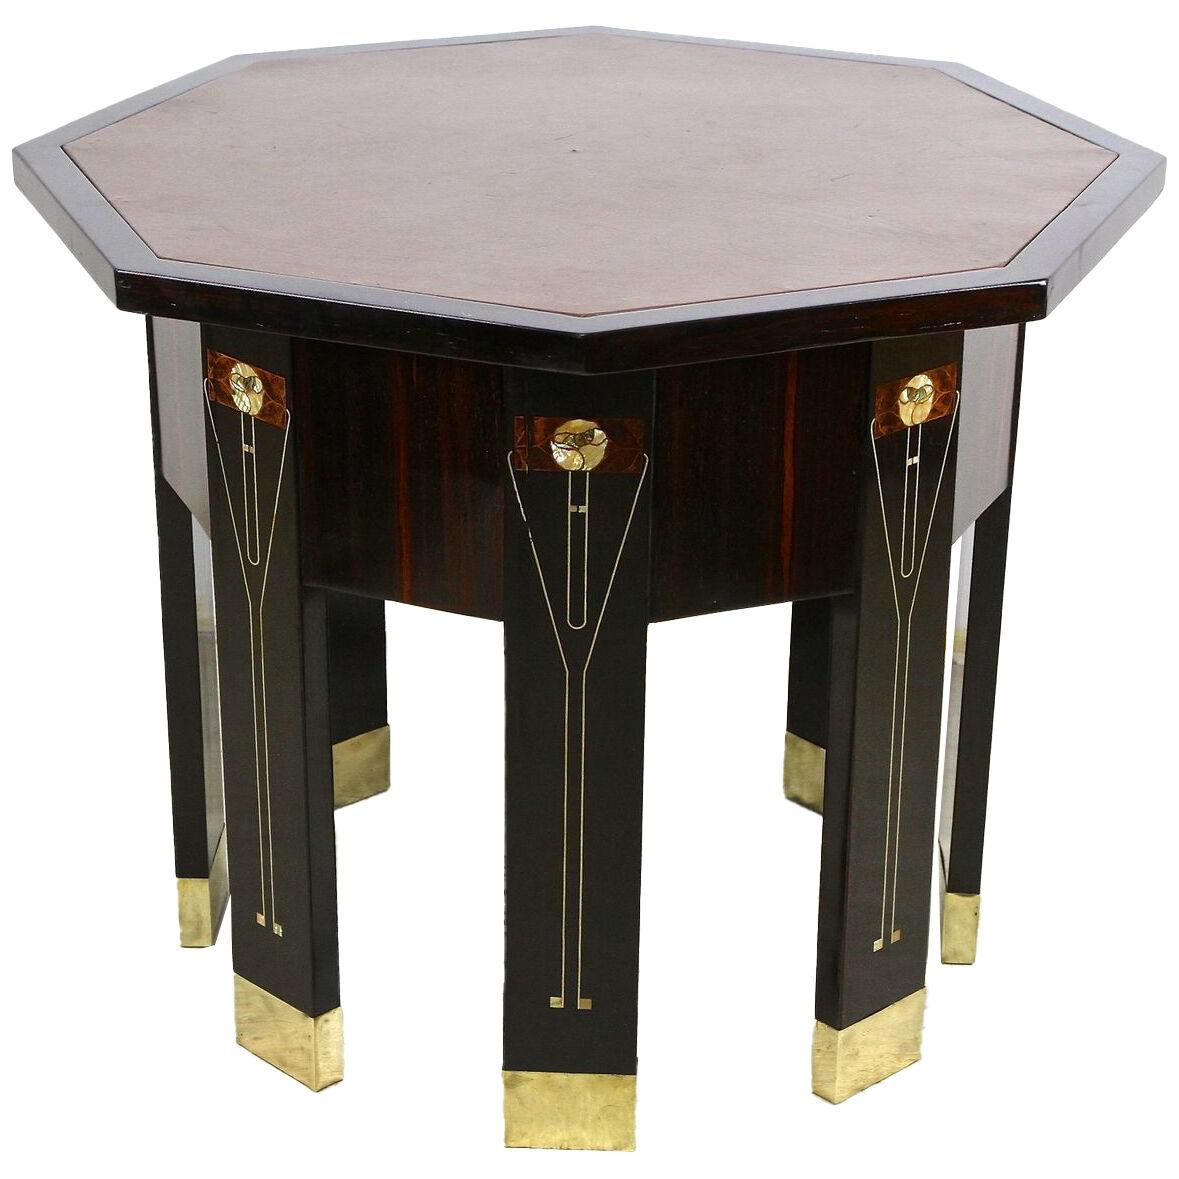 Art Nouveau Octagonal Palisander Table With Mother Of Pearl Inlays, AT ca. 1905